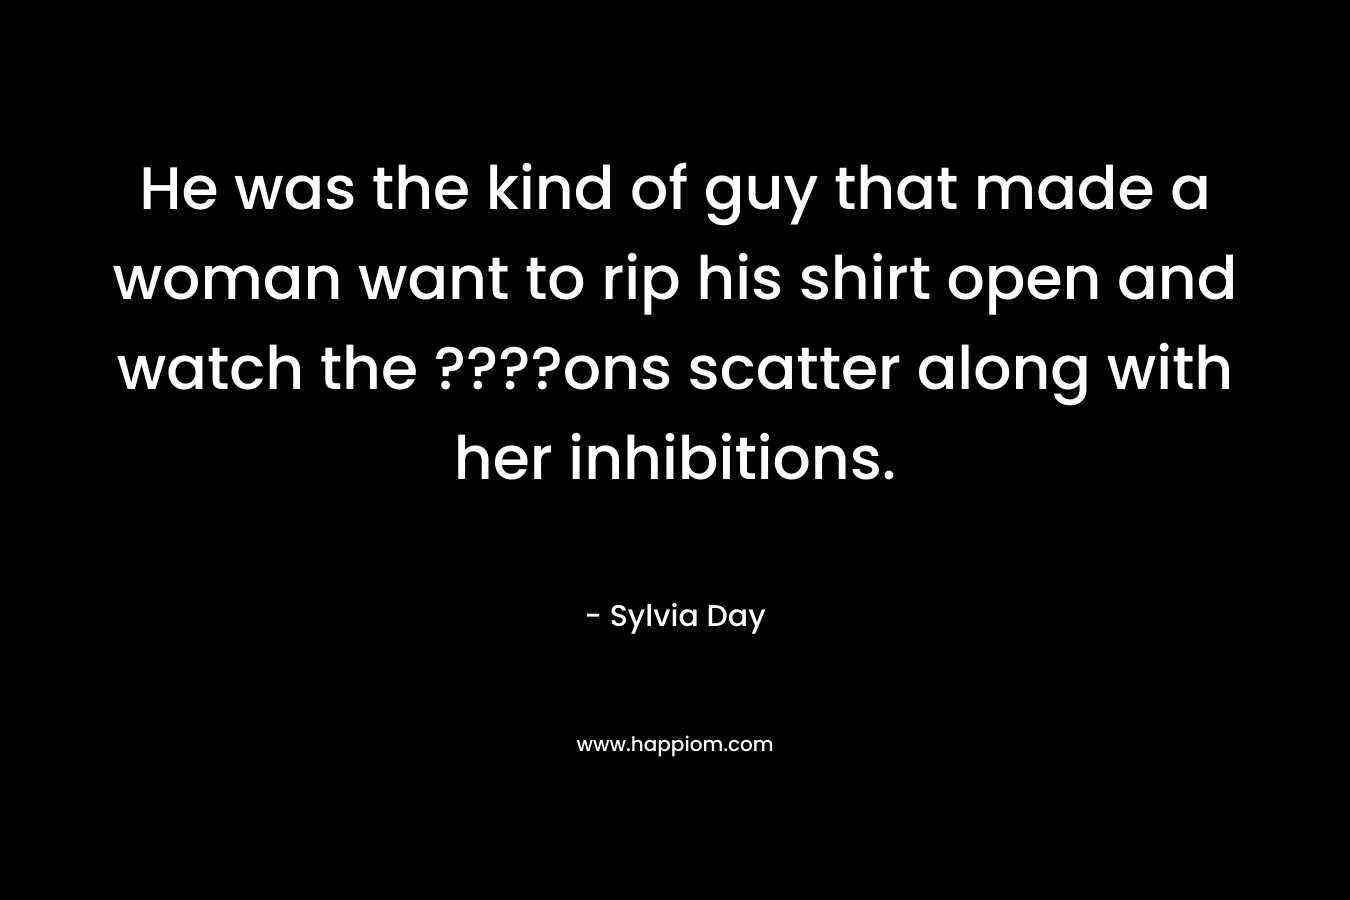 He was the kind of guy that made a woman want to rip his shirt open and watch the ????ons scatter along with her inhibitions.